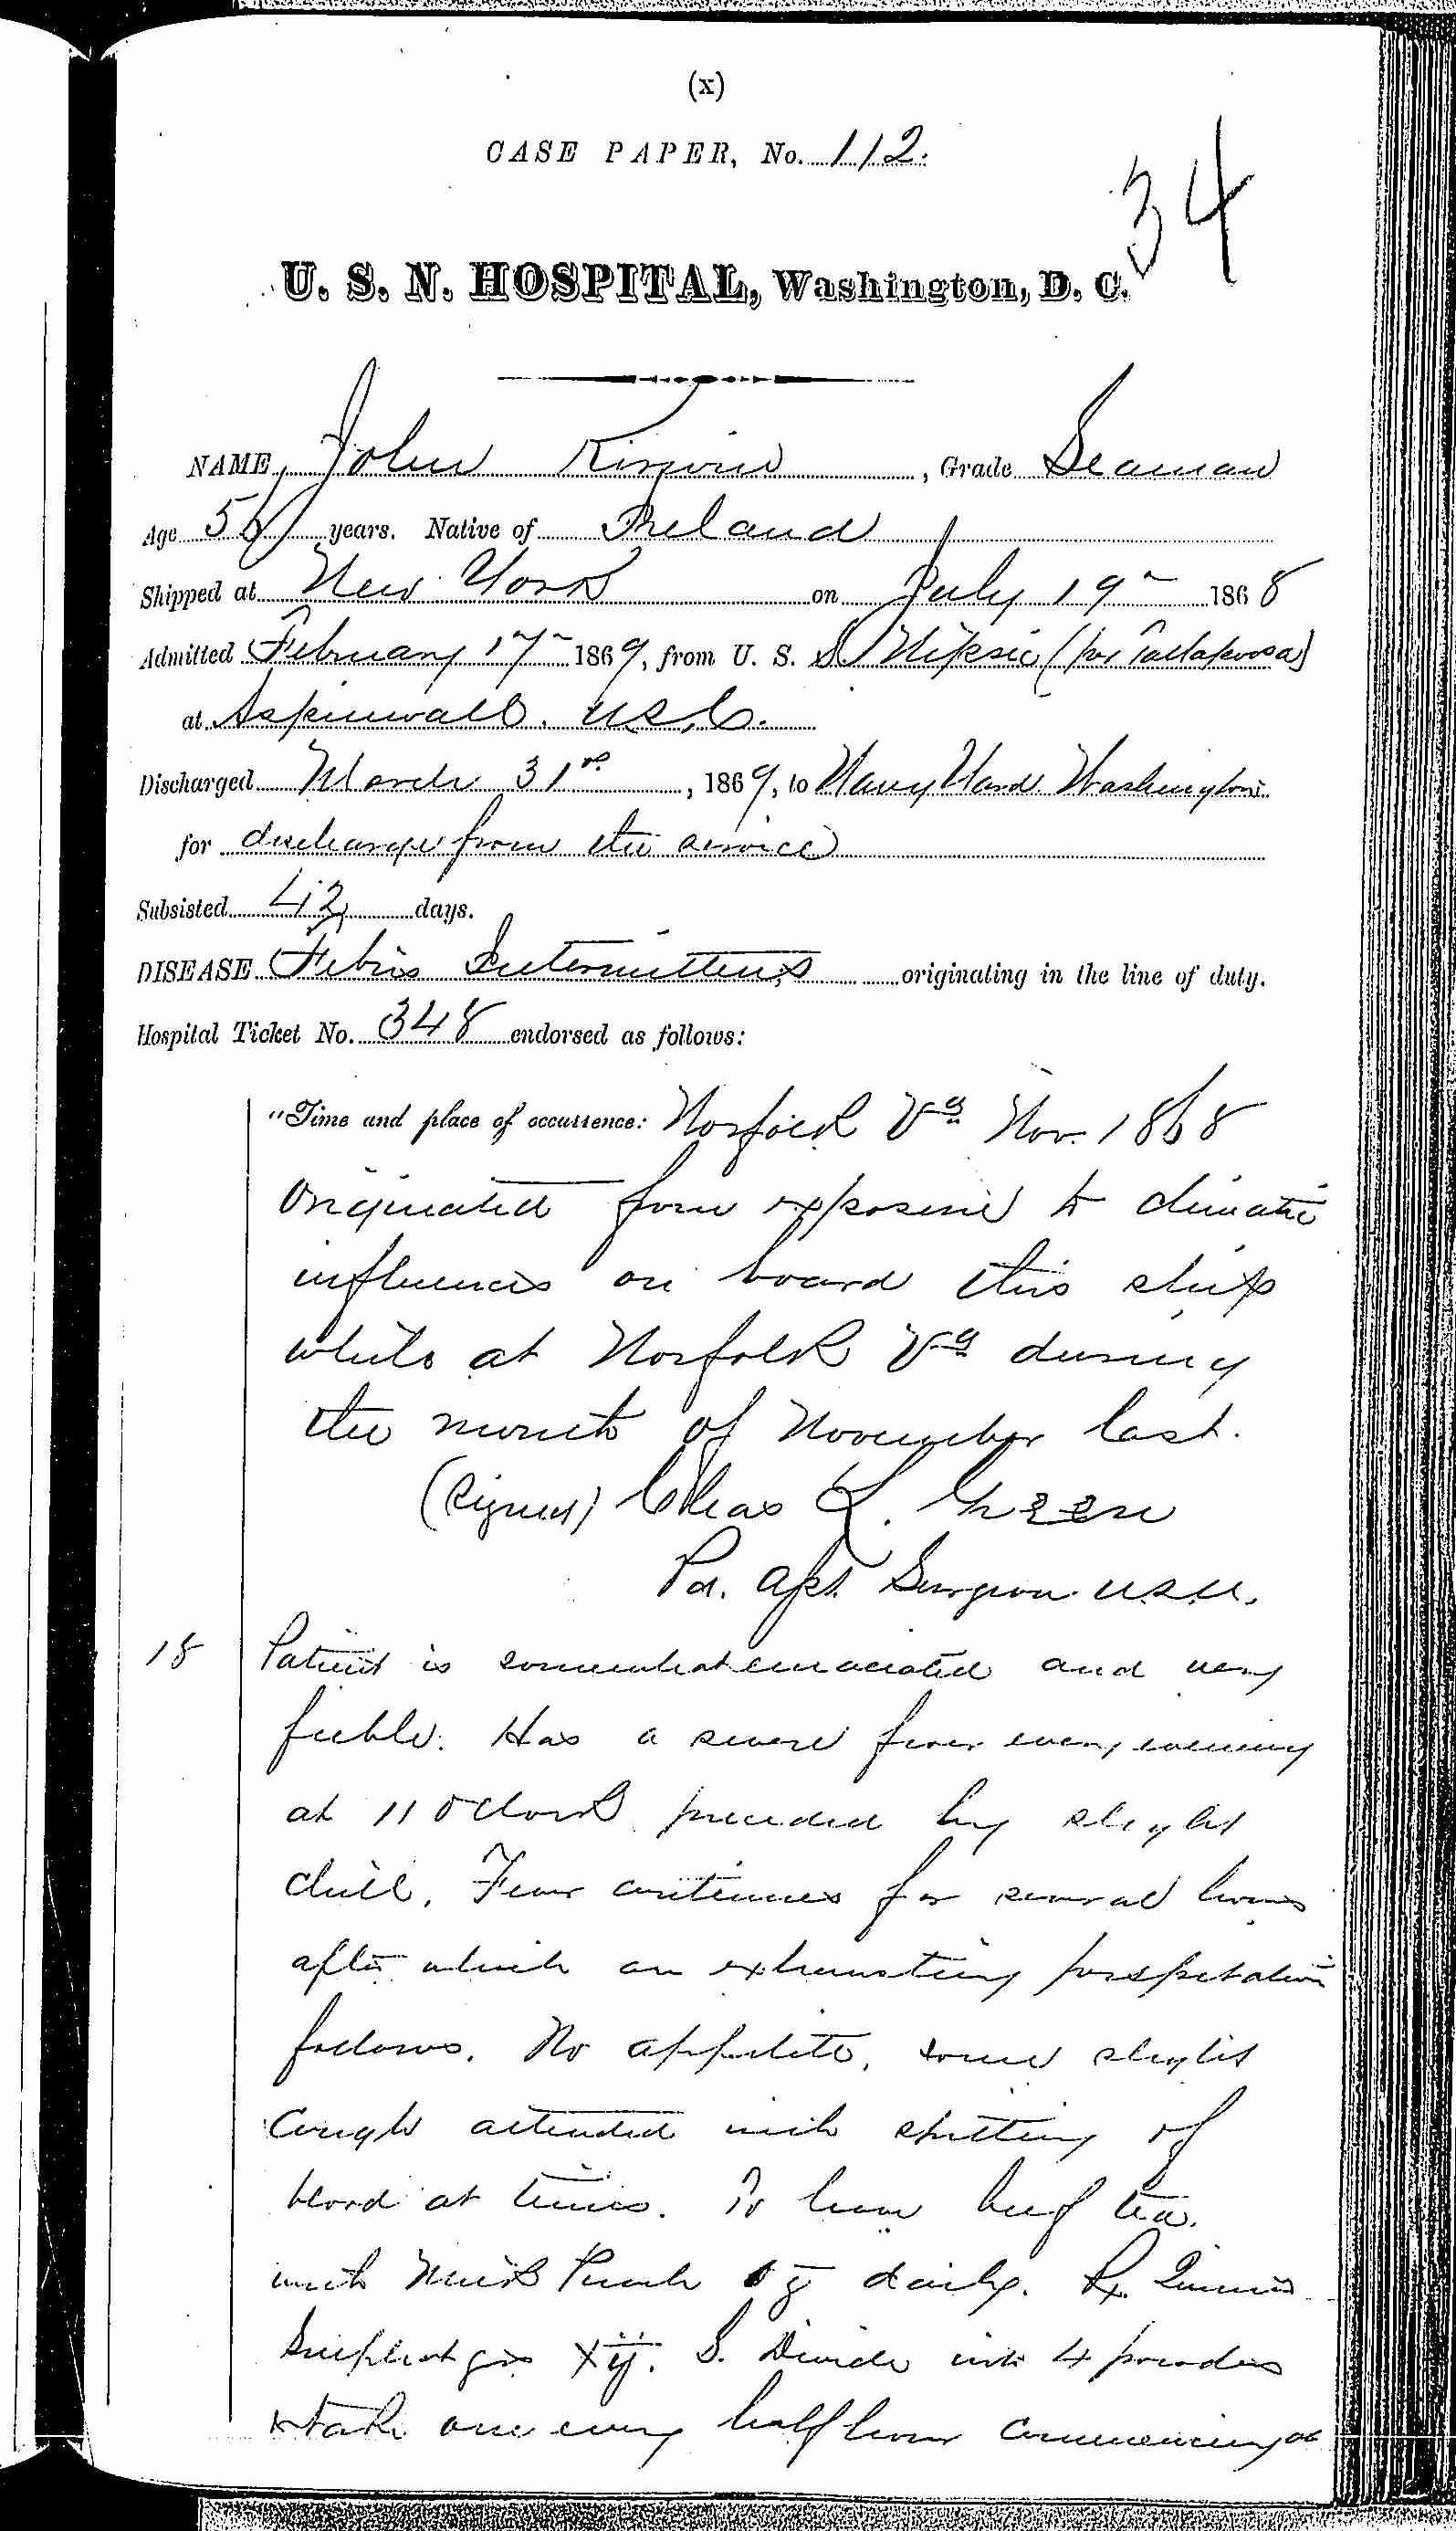 Entry for John Kerwin (page 1 of 3) in the log Hospital Tickets and Case Papers - Naval Hospital - Washington, D.C. - 1868-69